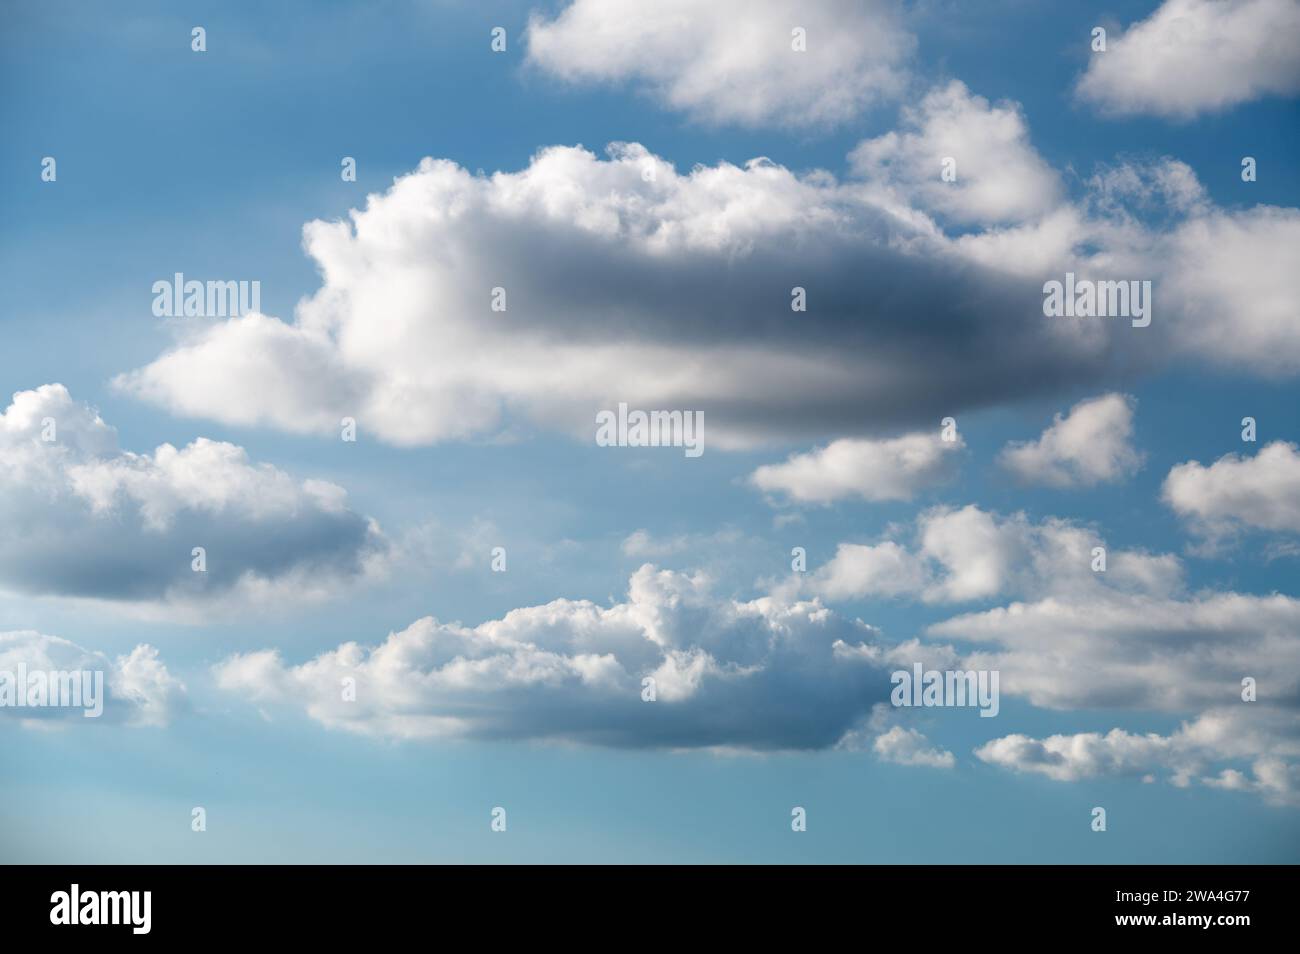 This is a tranquil scene of fluffy white clouds scattered across a deep blue sky, evoking a sense of calm and openness. Ideal for backgrounds. Stock Photo